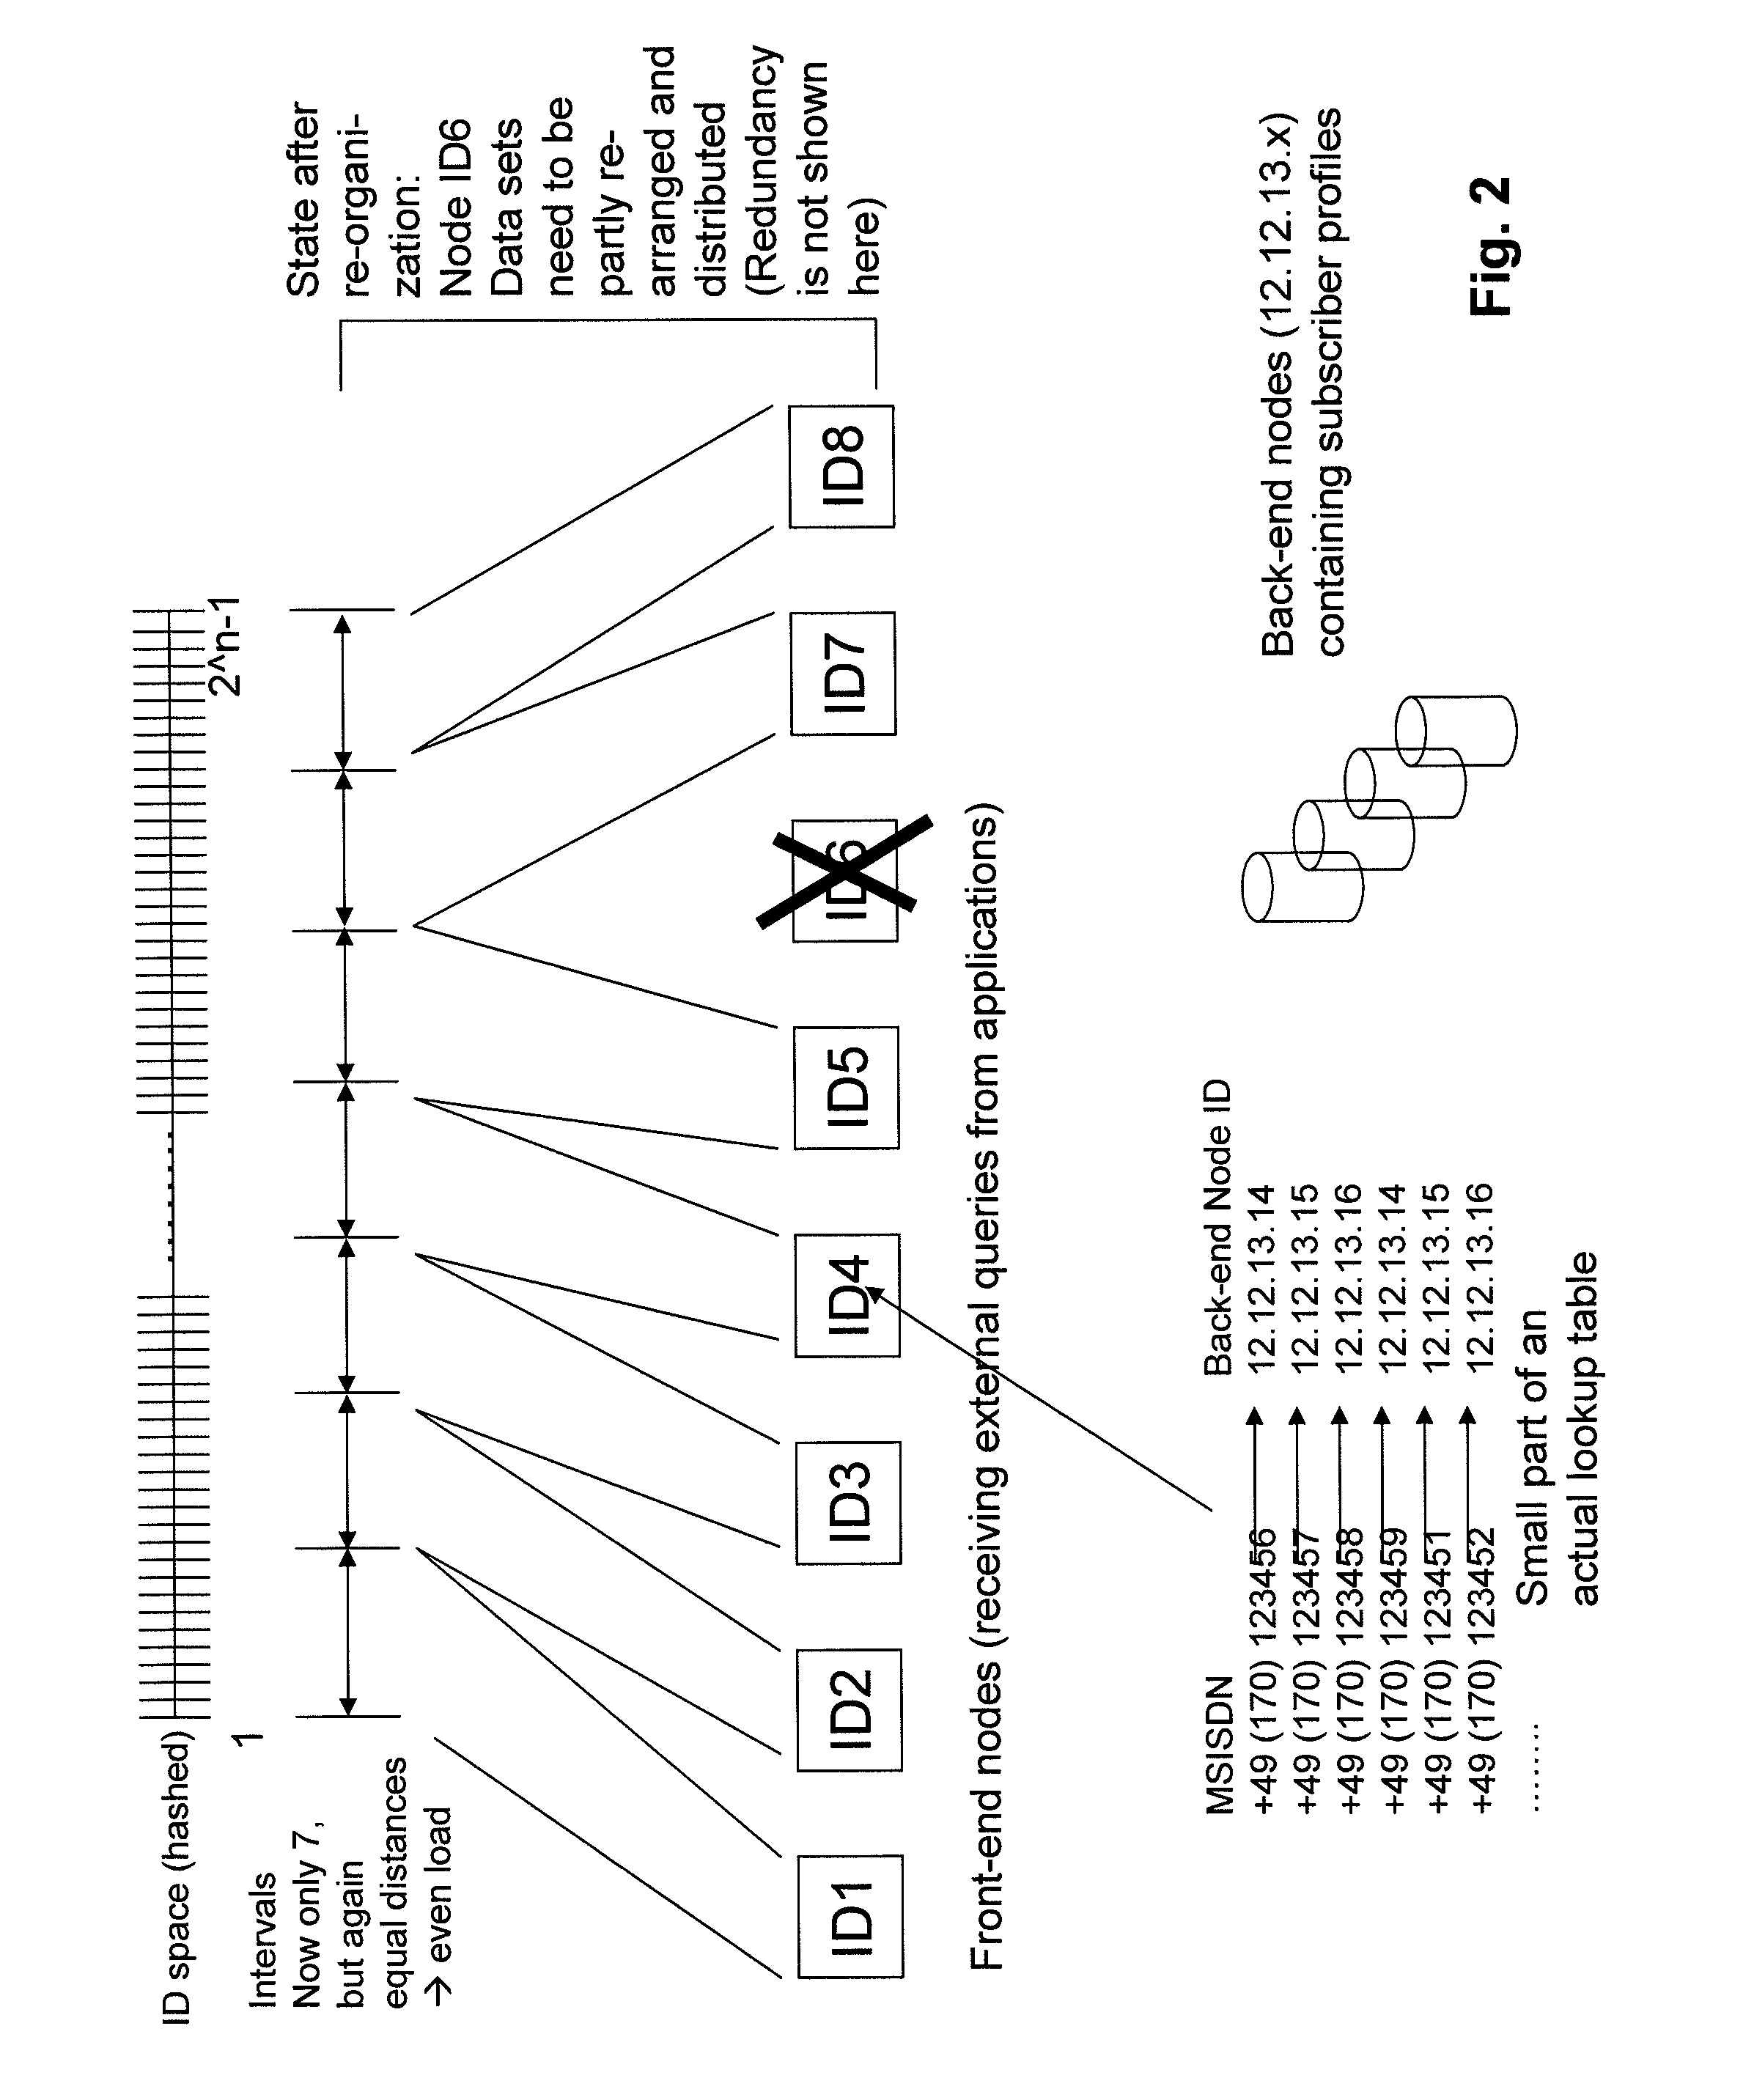 Distributed database system using master server to generate lookup tables for load distribution